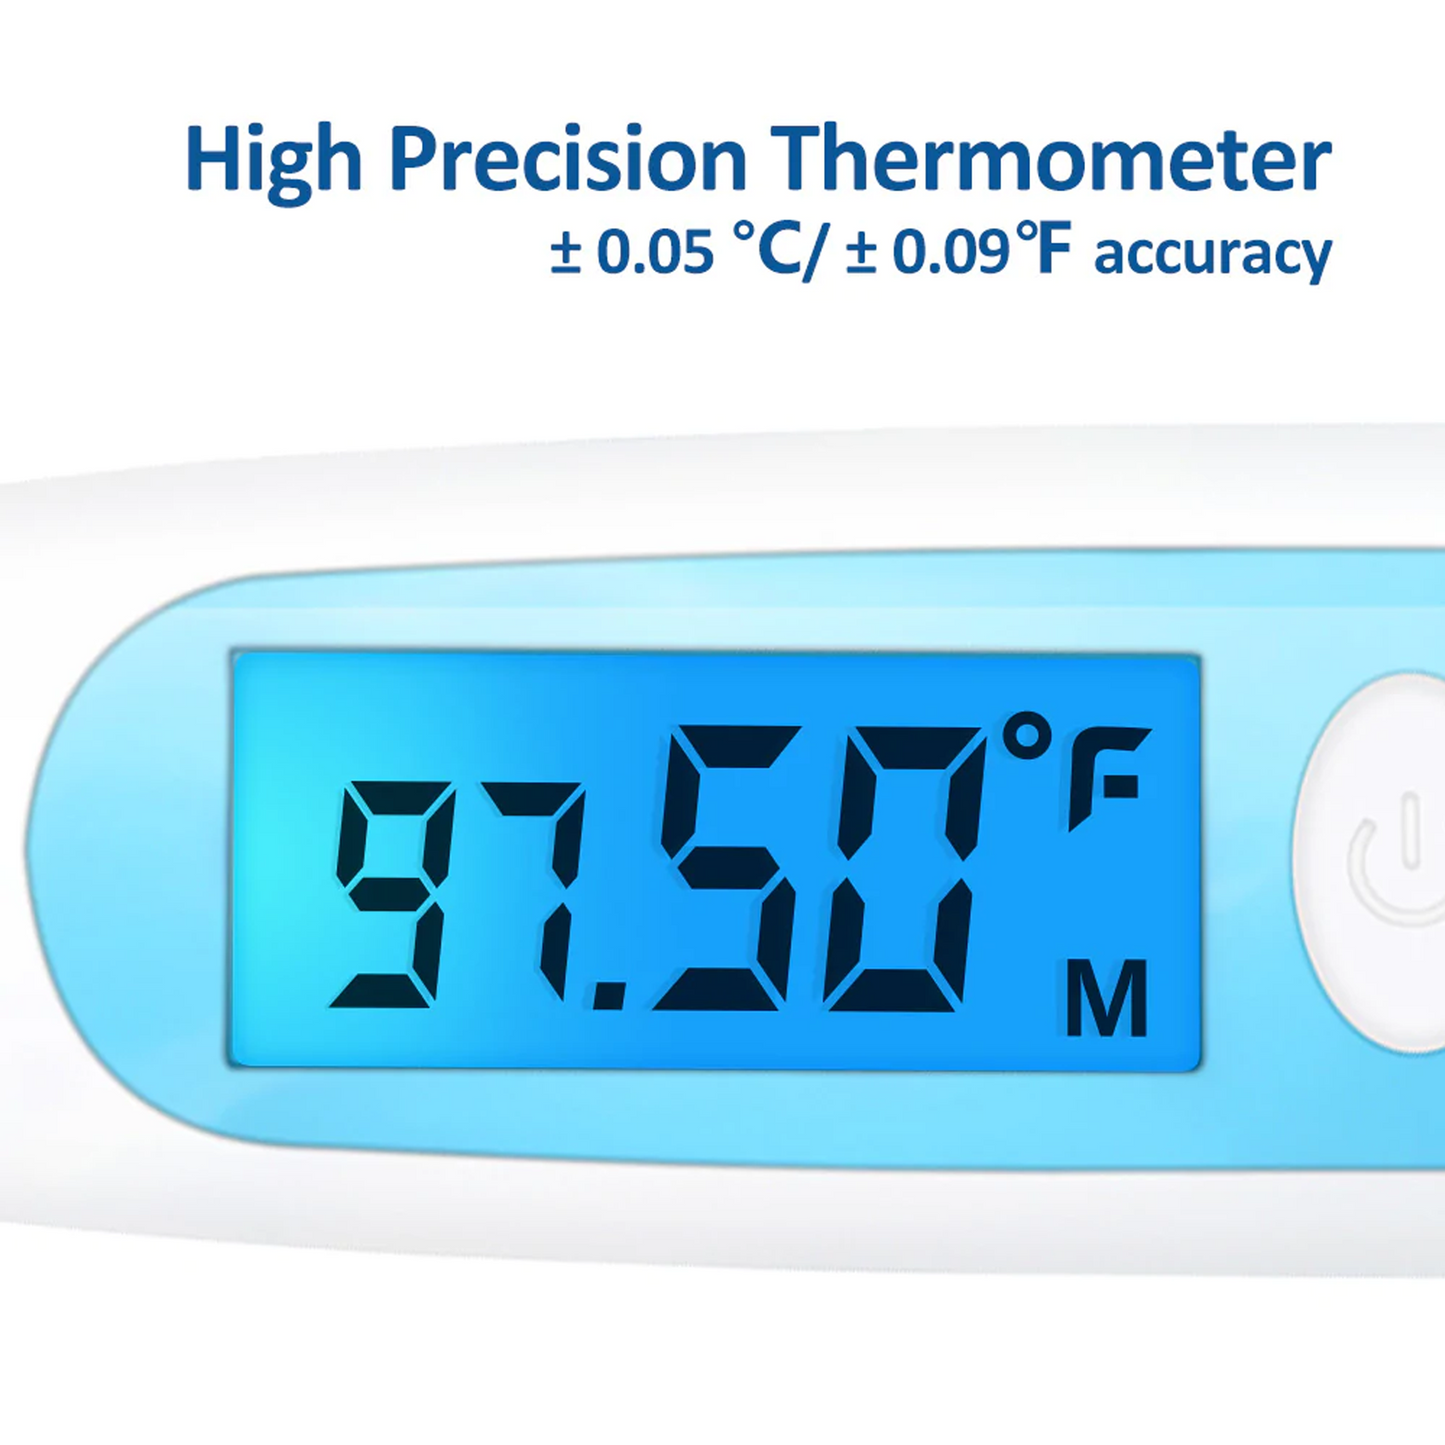 Easy@Home - Oral Basal Thermometer for Pregnancy Planning or Cycle Tracking OT 20+APP